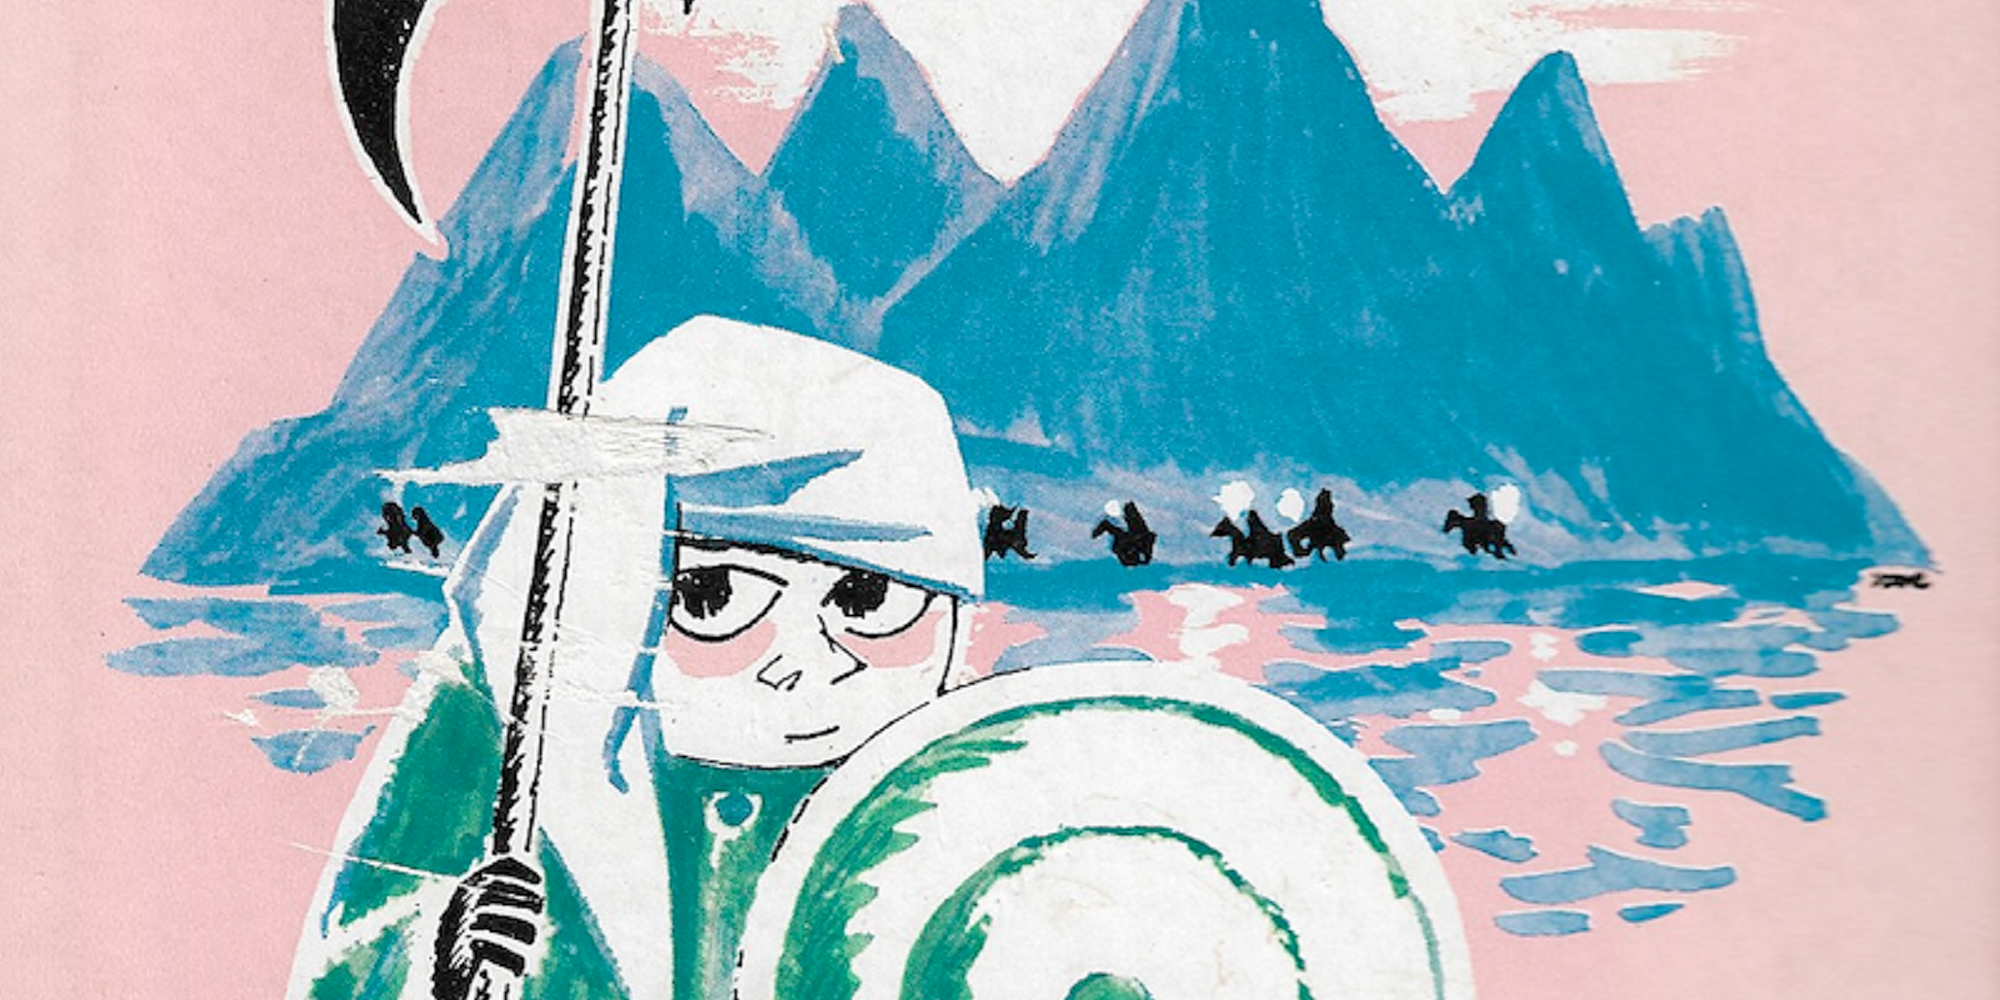 How the Moomins creator Tove Jansson forced Tolkien to rewrite